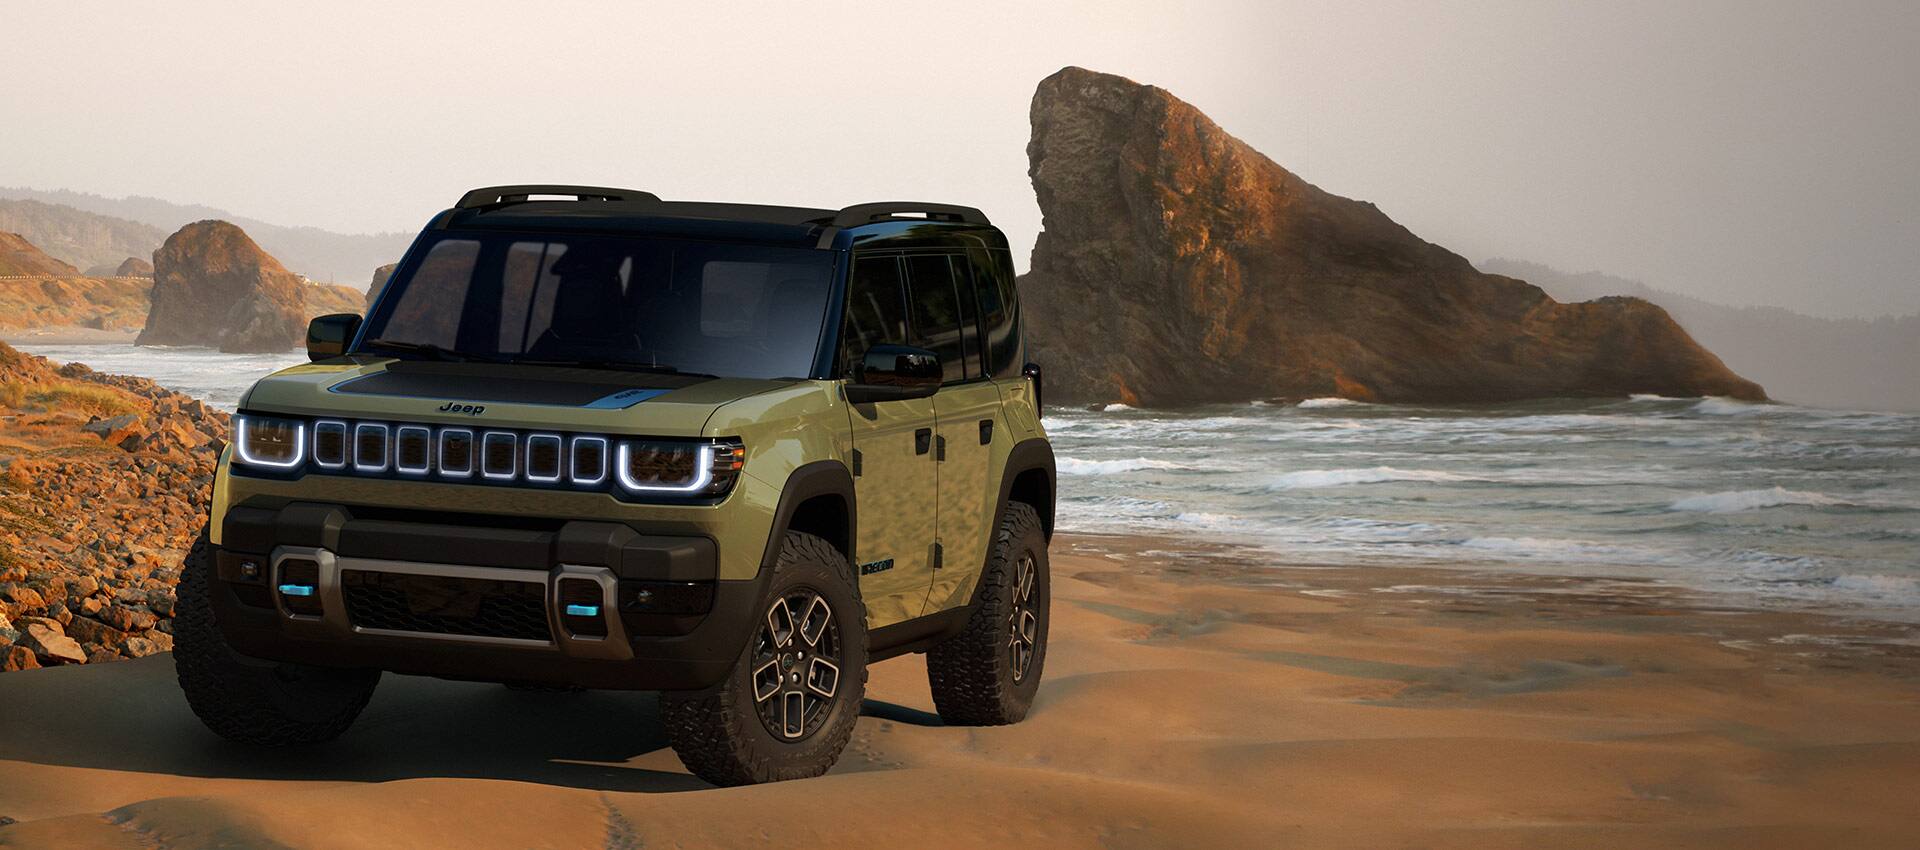 The 2023 Jeep Recon 4xe parked on a red sand beach with large rock formations in the distance.